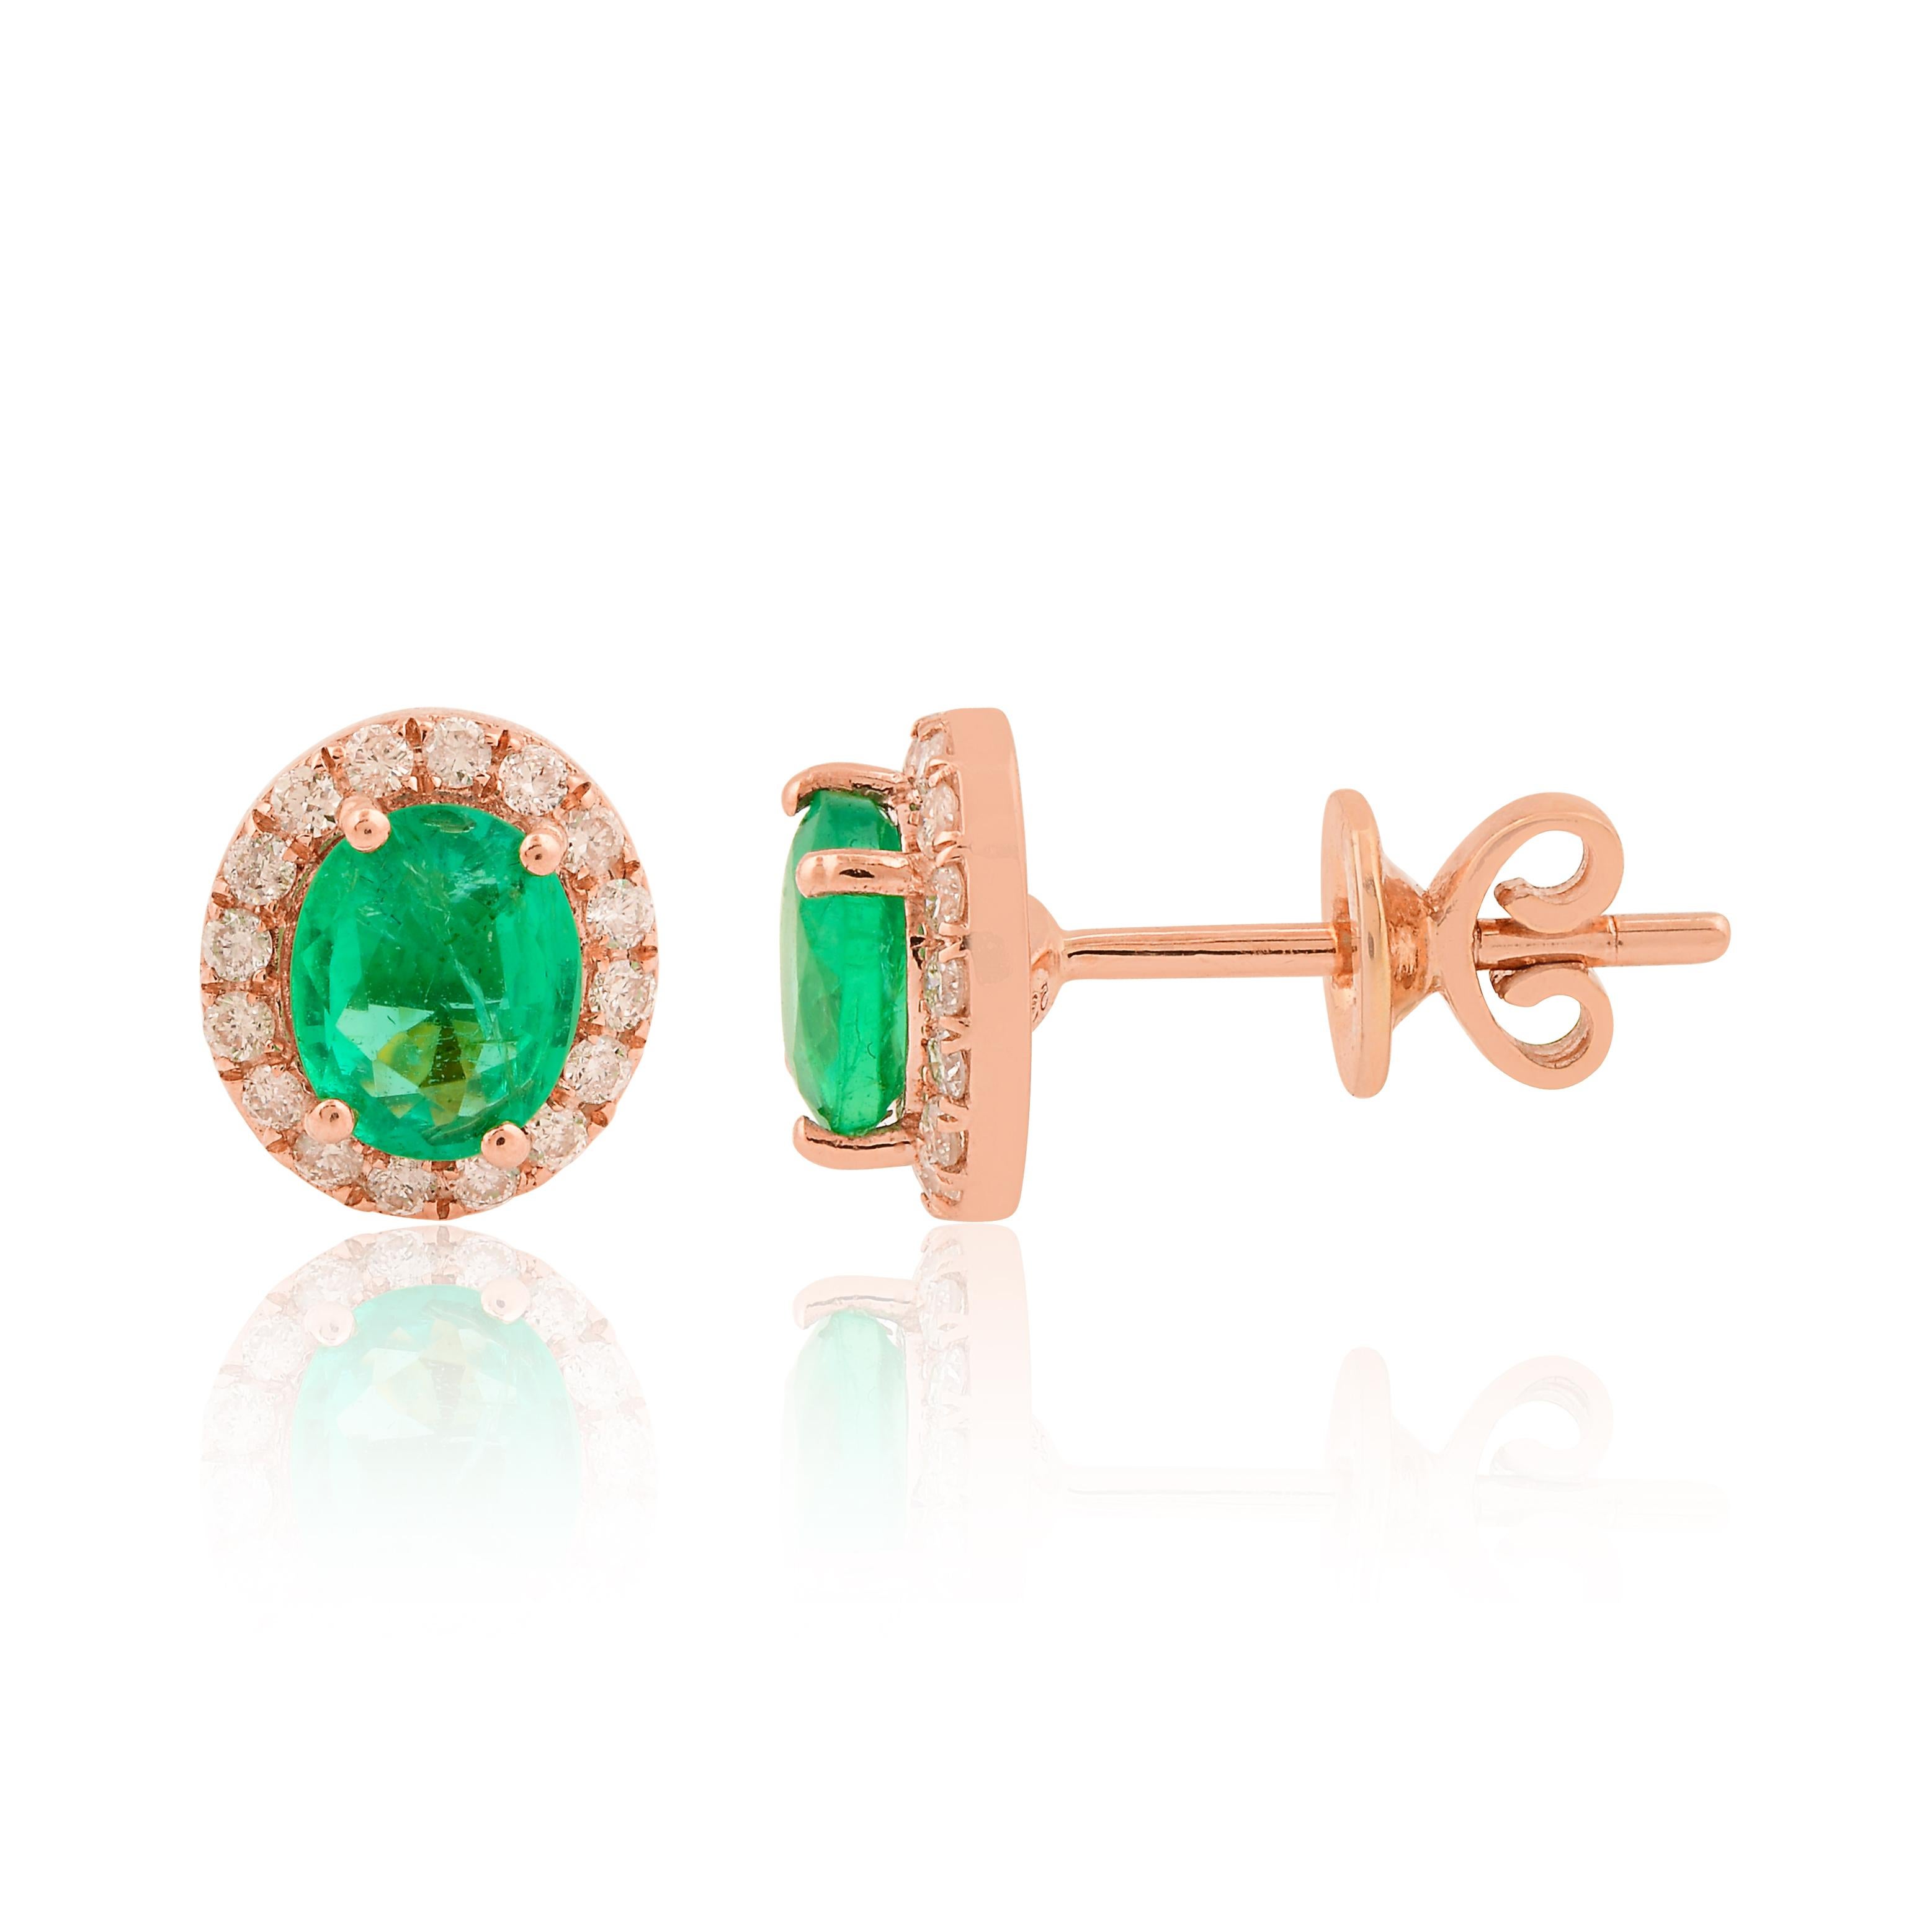 Indulge in the timeless elegance of these Natural Emerald Gemstone Stud Earrings, adorned with diamonds, set in exquisite 10 Karat Rose Gold. Crafted with meticulous attention to detail, these earrings boast a sophisticated design that effortlessly